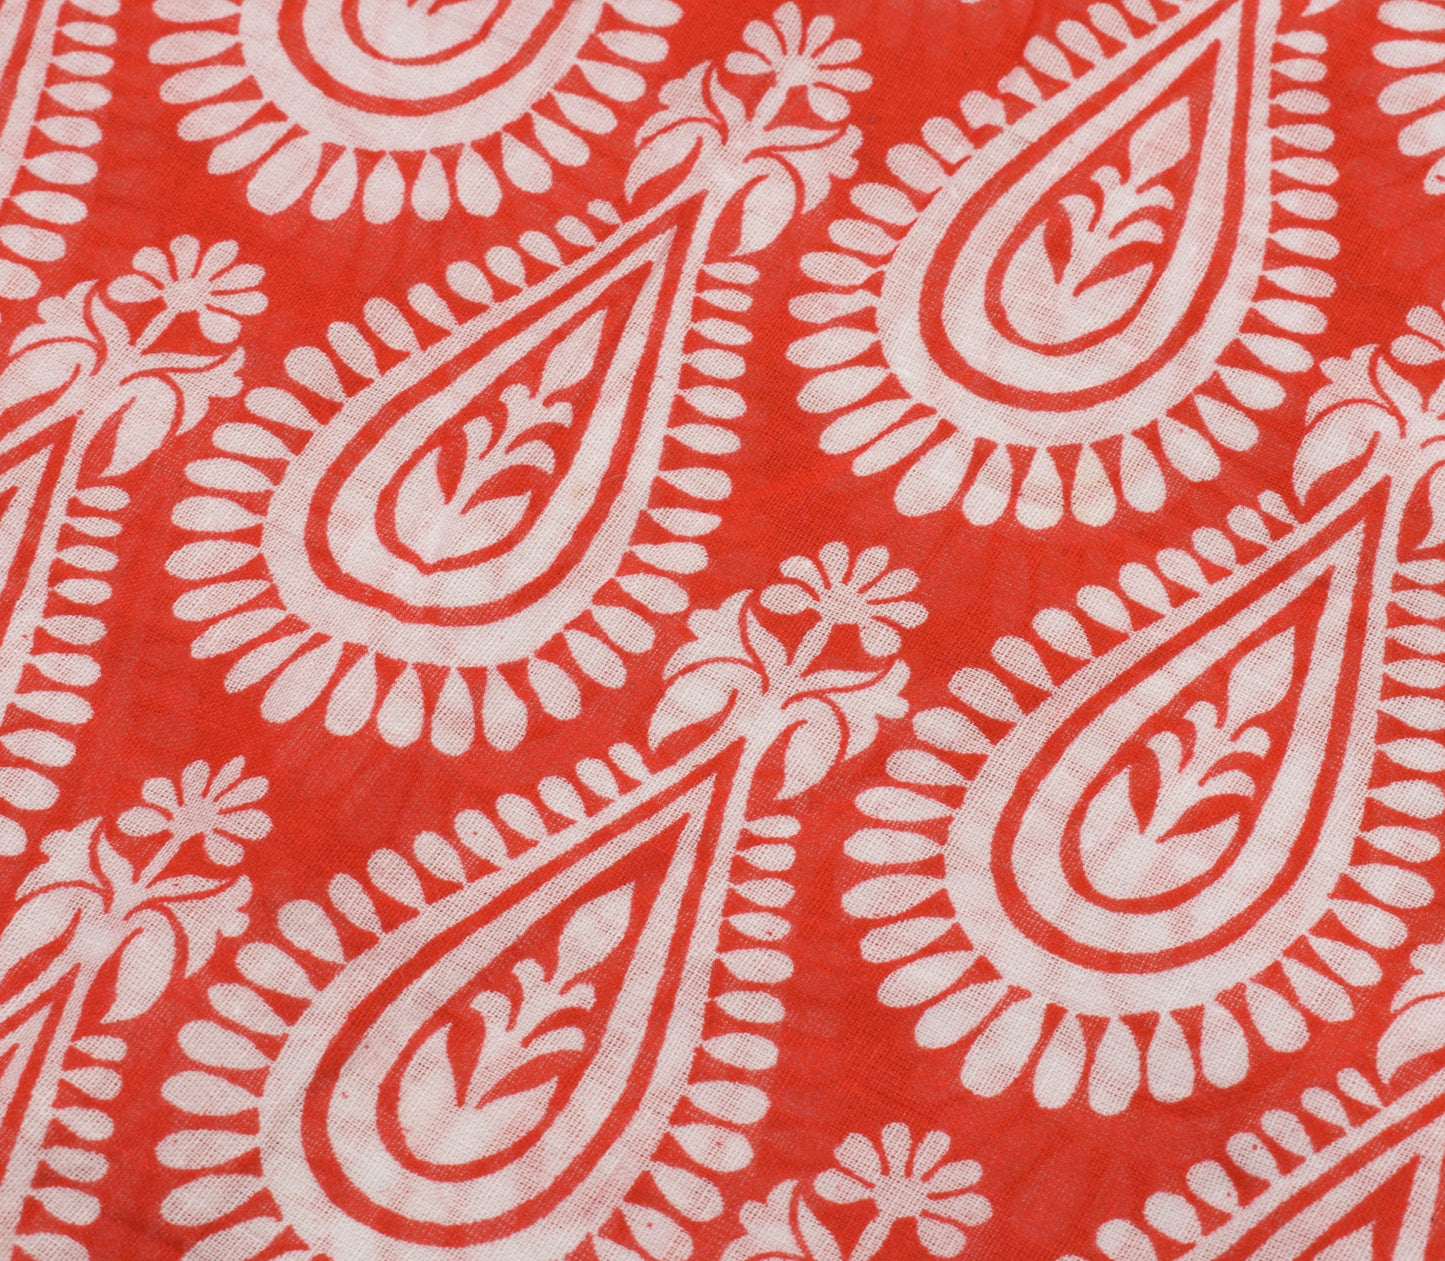 Sushila Vintage Red Saree 100% Pure Cotton Printed Floral 5 Yard Craft Fabric